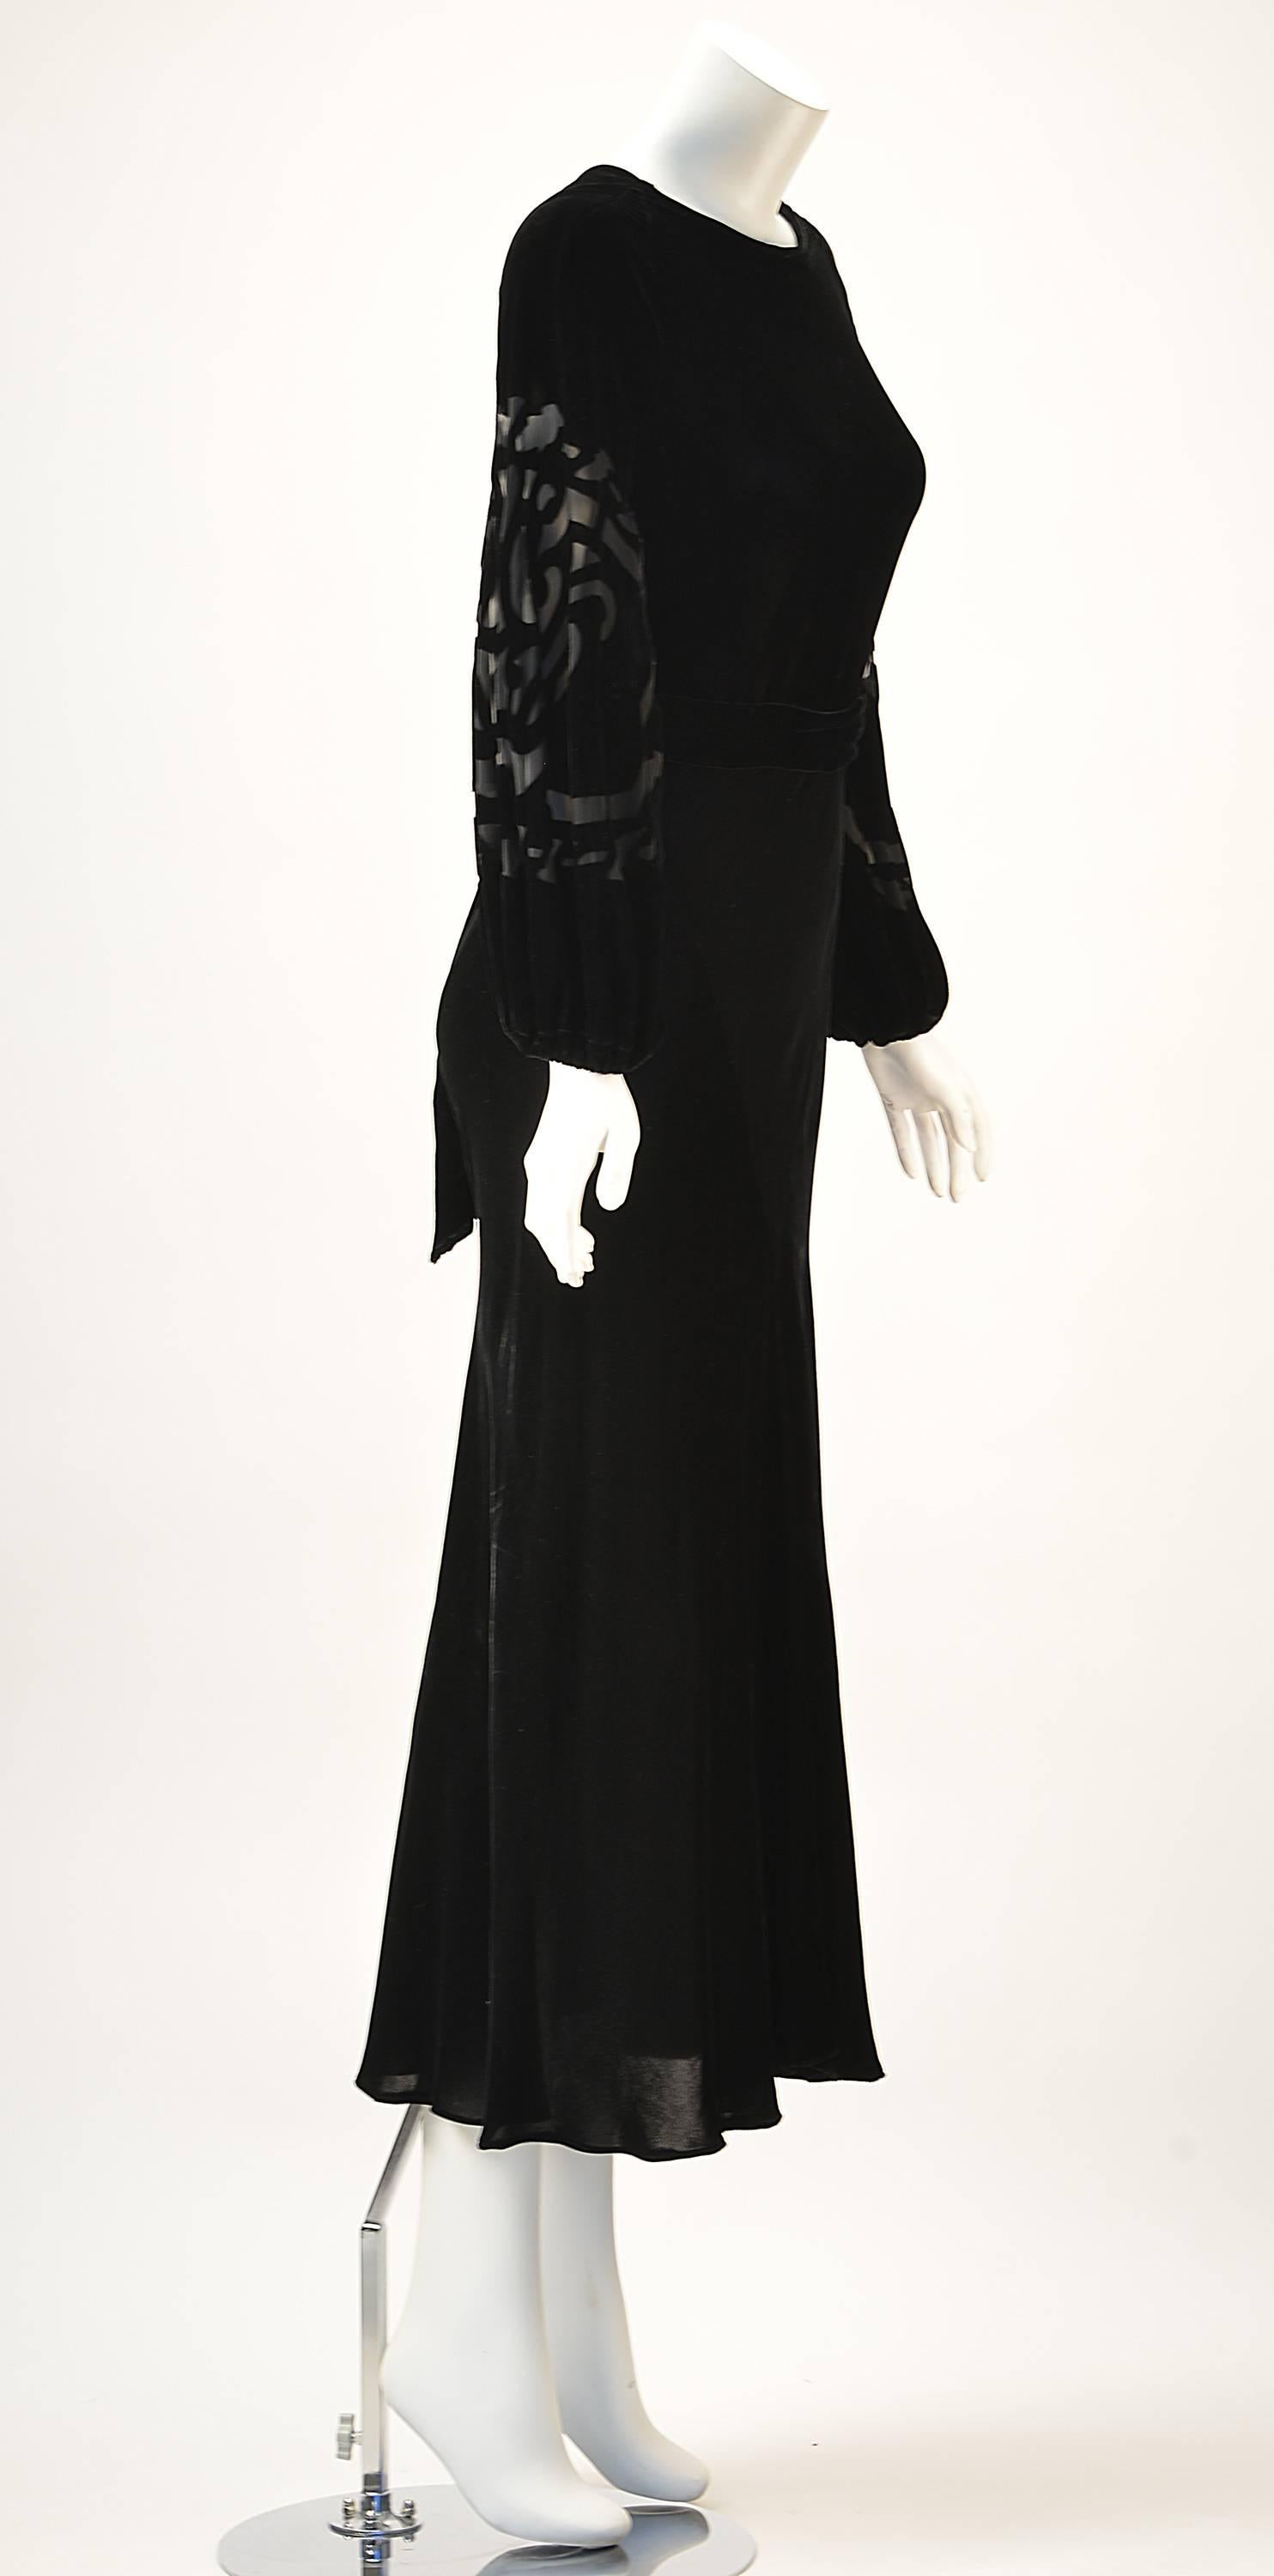 Beautiful bias cut black velvet dress with bishop sleeves. The bias cut velvet hugs the shape of your body while the silk burn out sleeves add romance. There is a velvet belt that ties at the back. It has a Boat neckline with a slight weighted drape